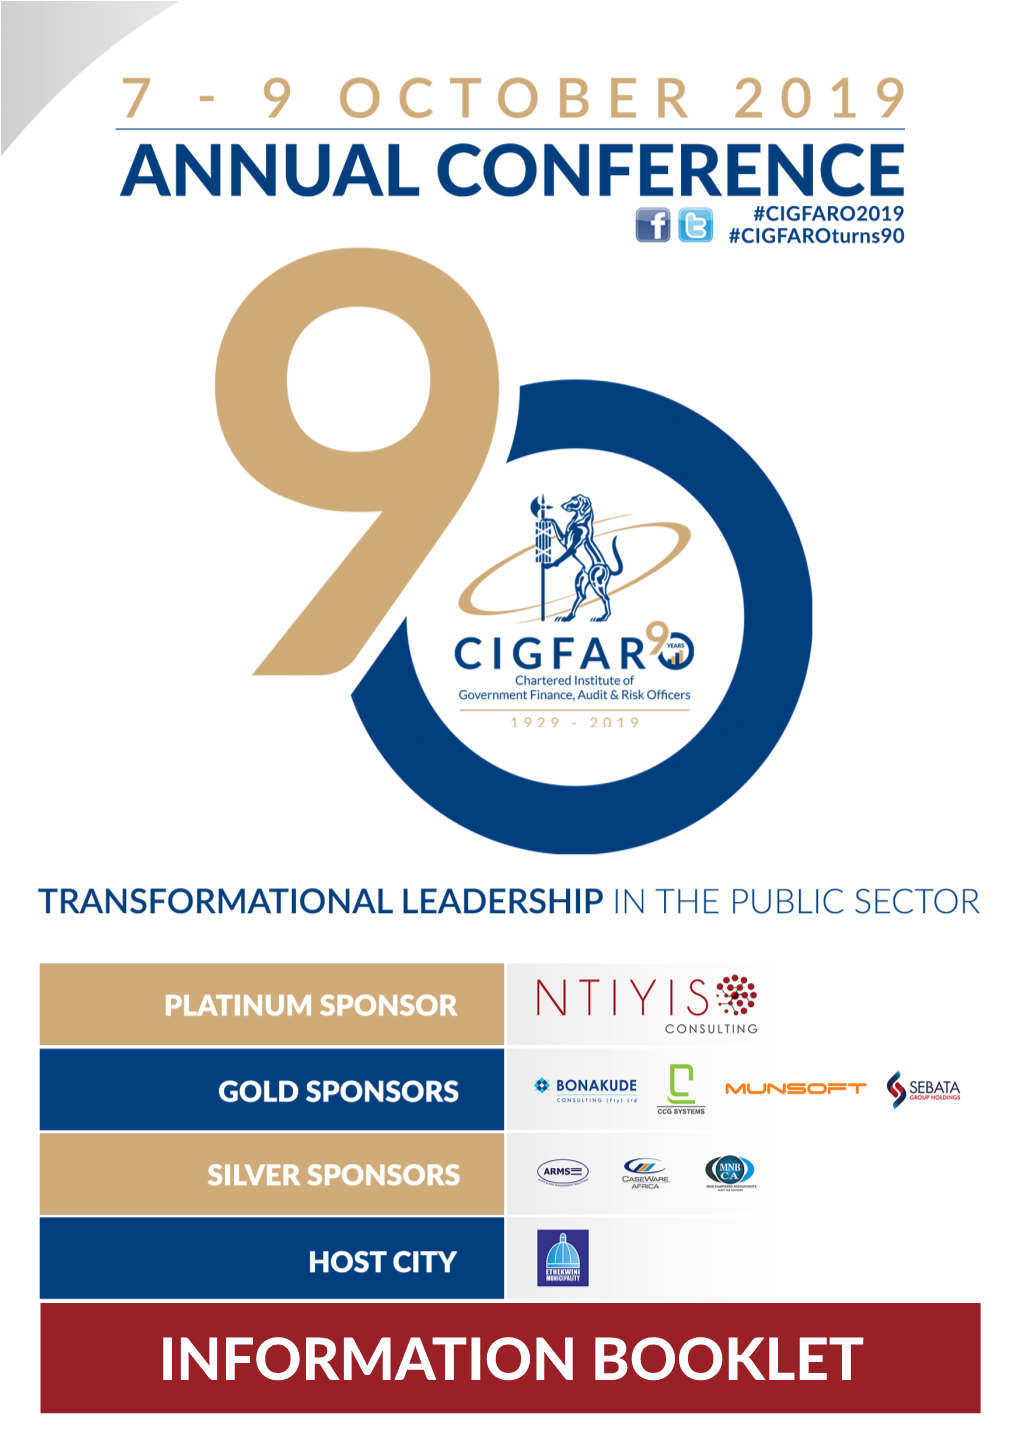 INFORMATION BOOKLET CIGFARO ANNUAL CONFERENCE 2019 1 Premier Innovators in Management Consulting CONSULTING